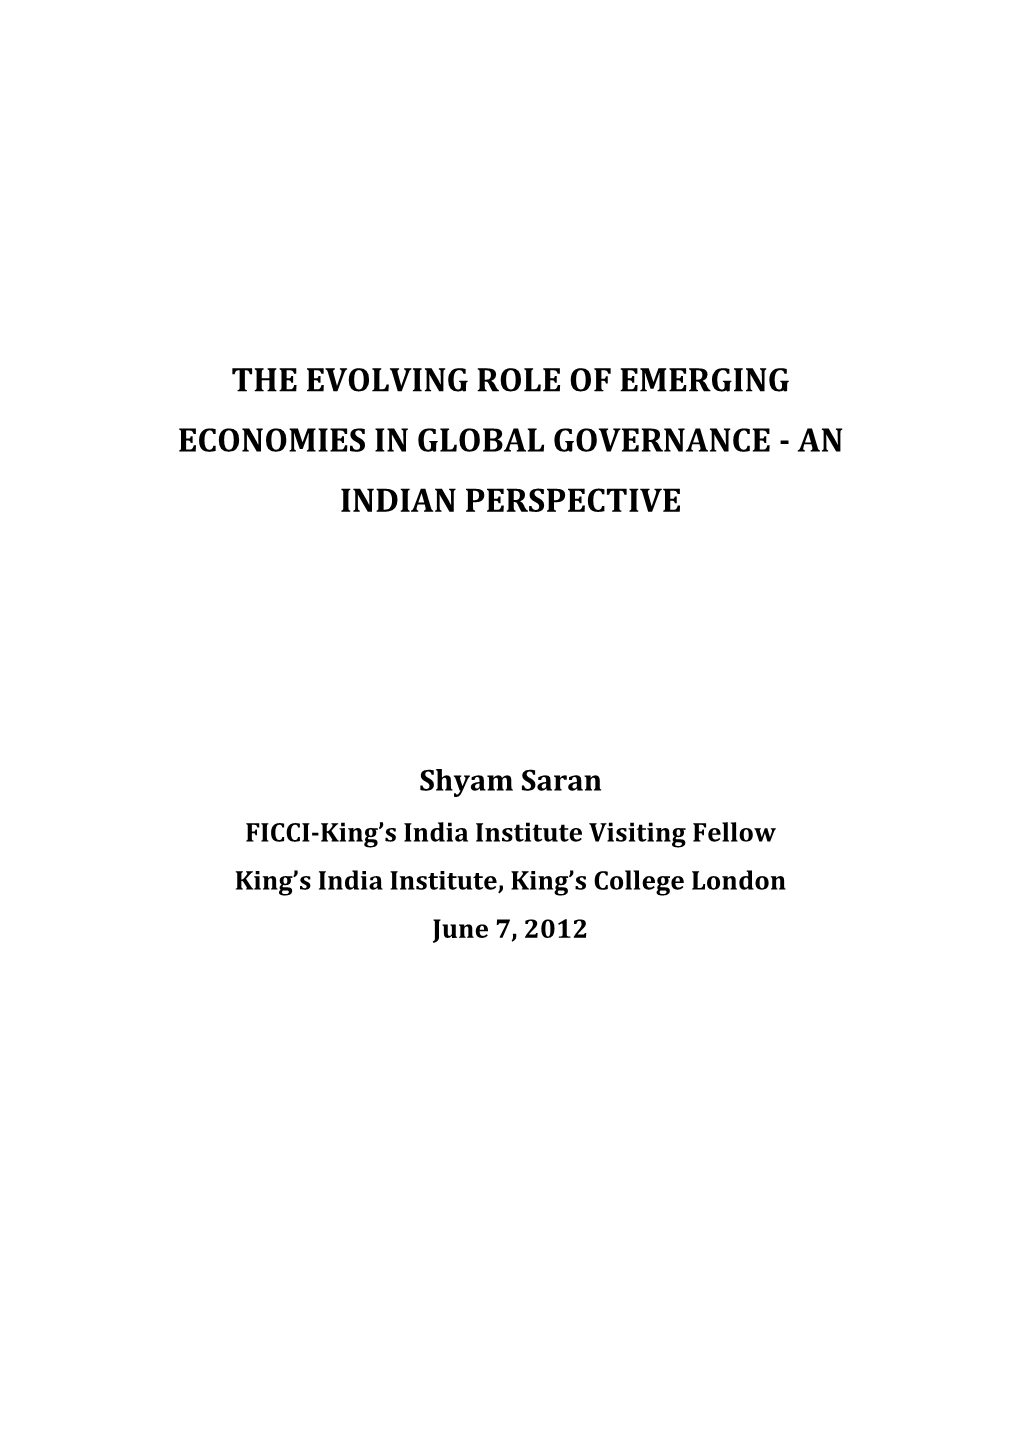 The Evolving Role of Emerging Economies in Global Governance - an Indian Perspective